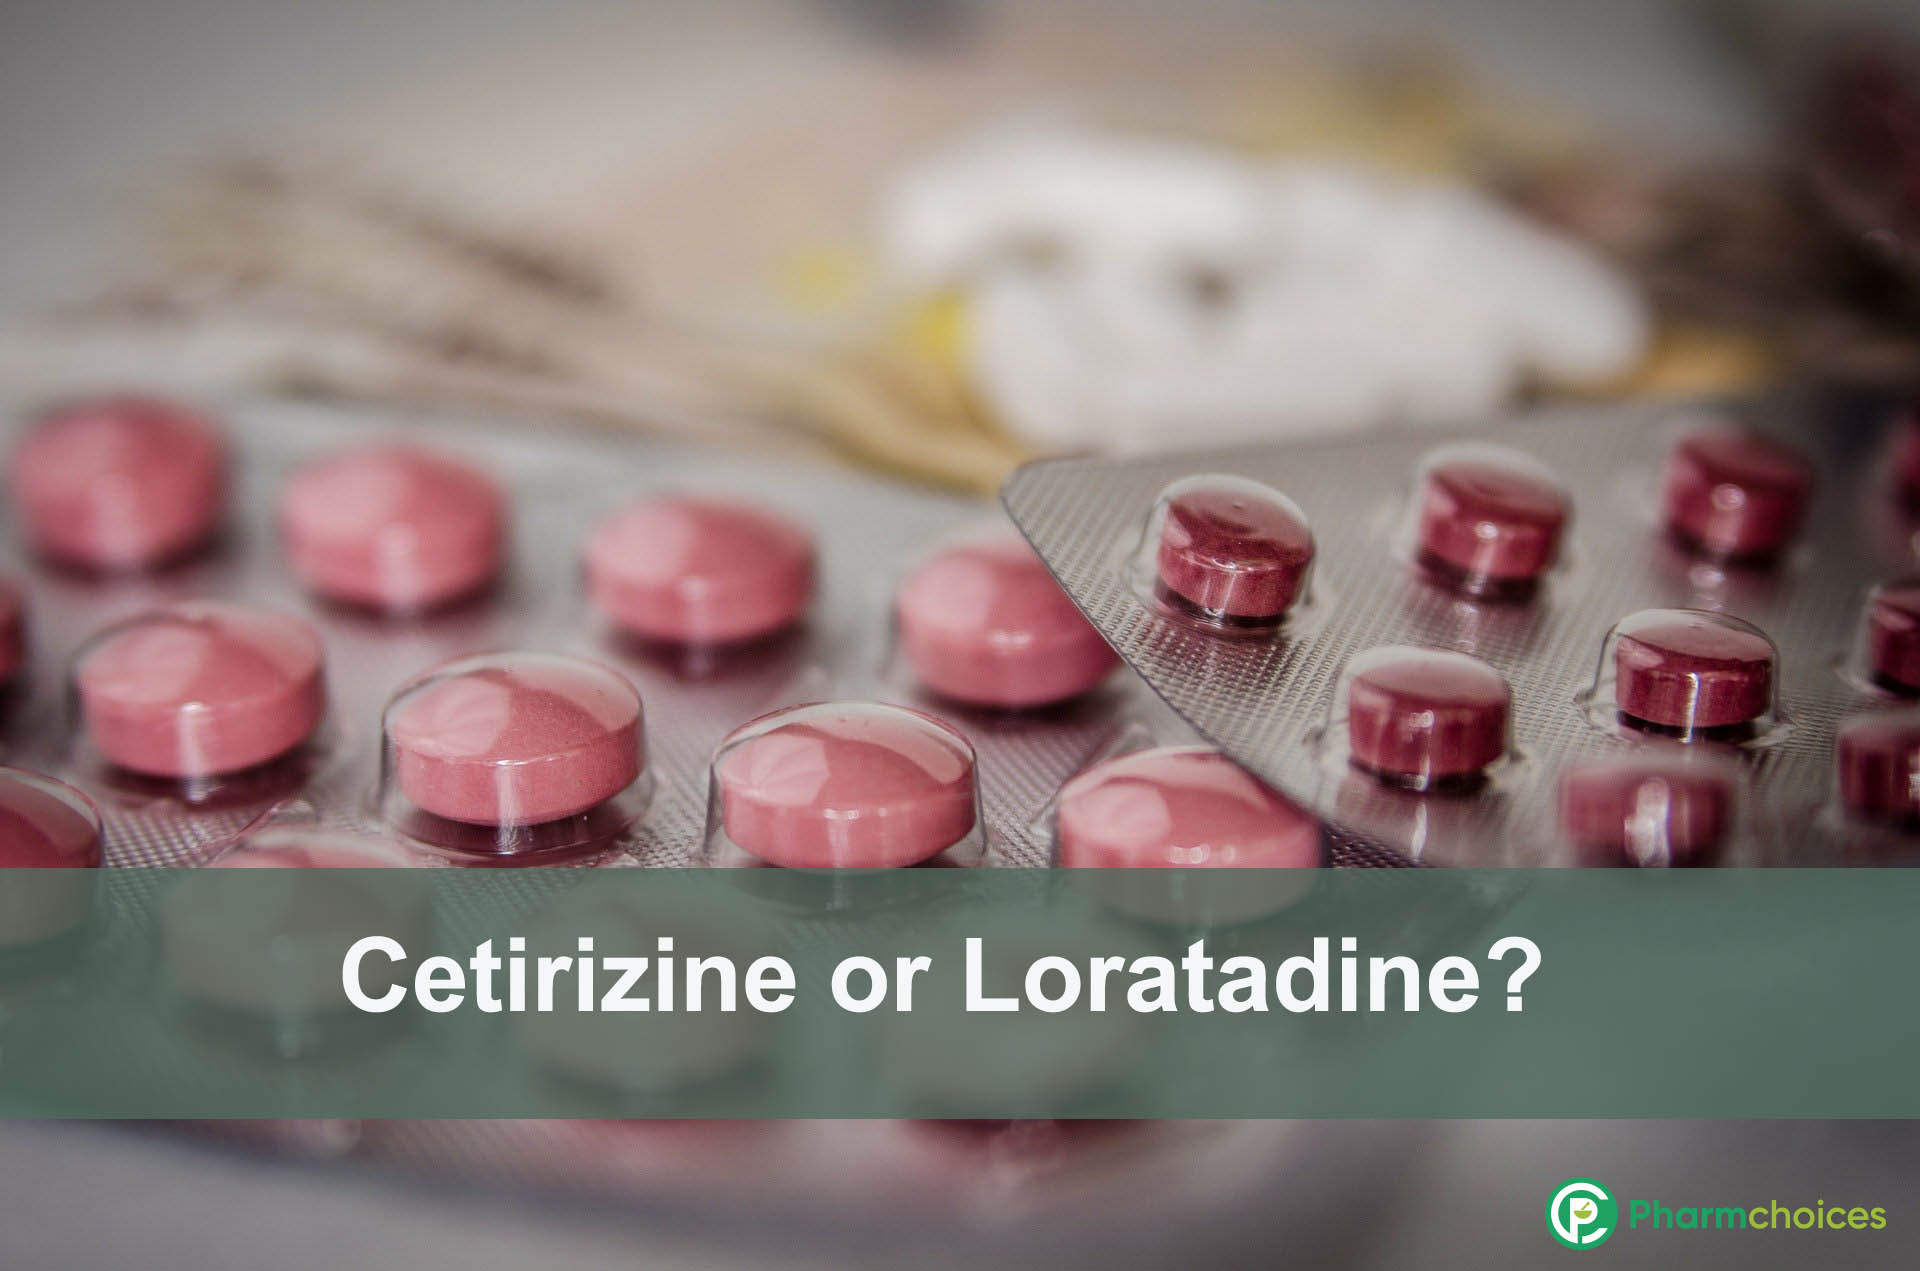 Loratadine and cetirizine are both anti-histamines used for treating allergic conditions such as rhinitis, colds, pruritus, urticarial rashes, sneezing, allergic conjunctivitis, and nasal congestion. The question is - should I take loratadine or cetirizine hydrochloride